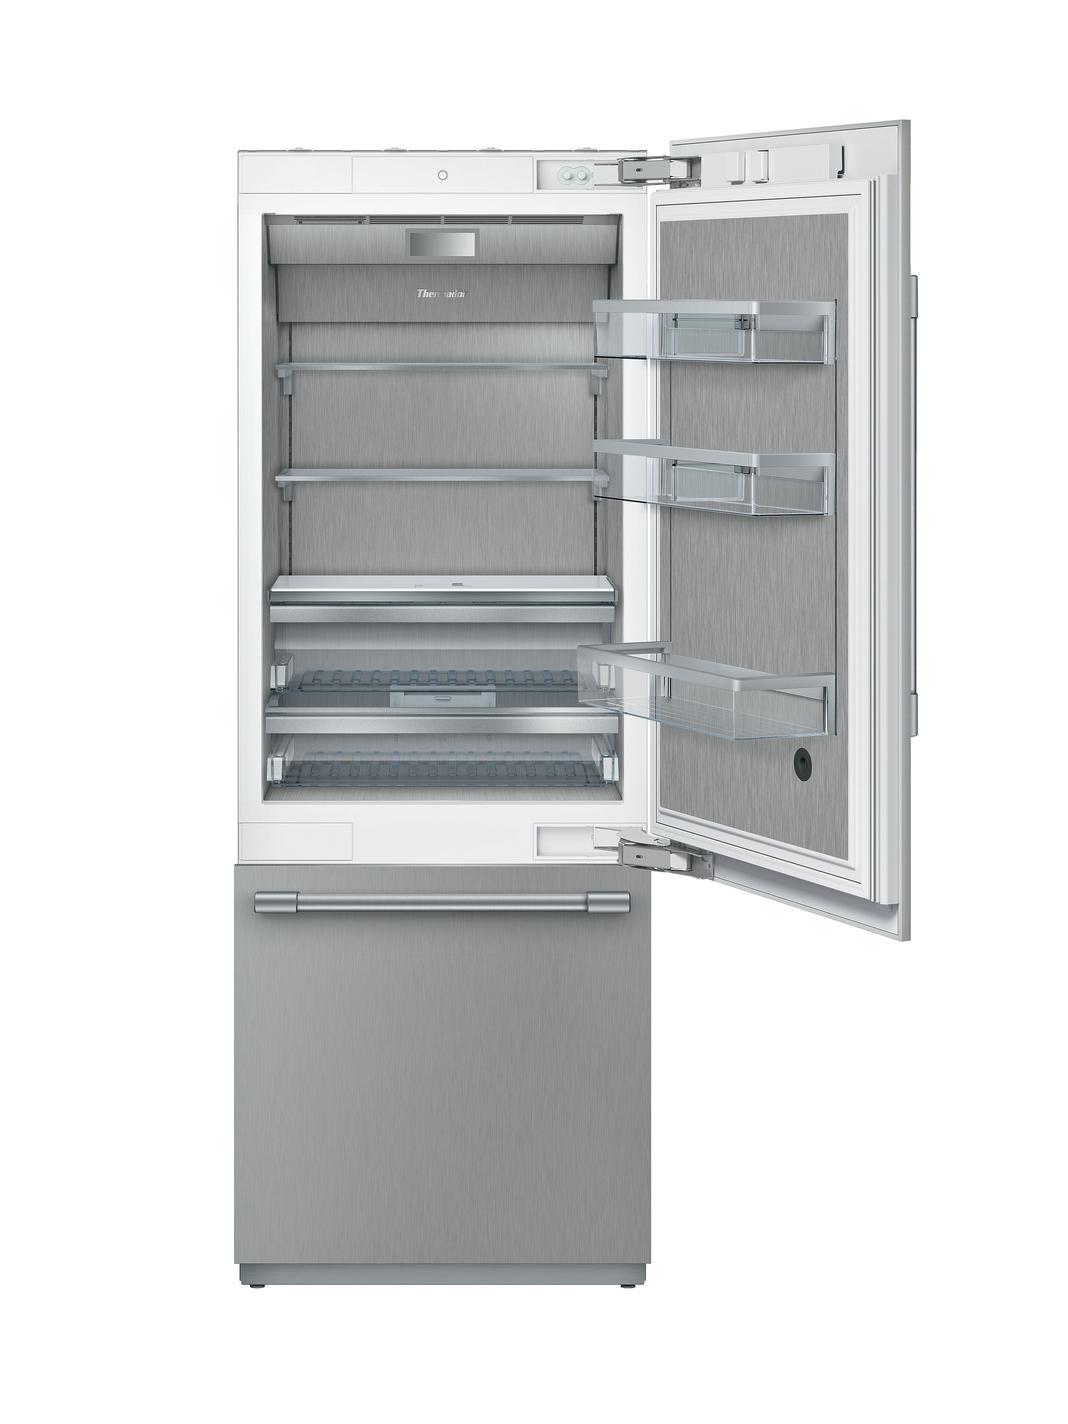 Thermador - 29.75 Inch 16 cu. ft Built In / Integrated Bottom Mount Refrigerator in Panel Ready - T30IB905SP